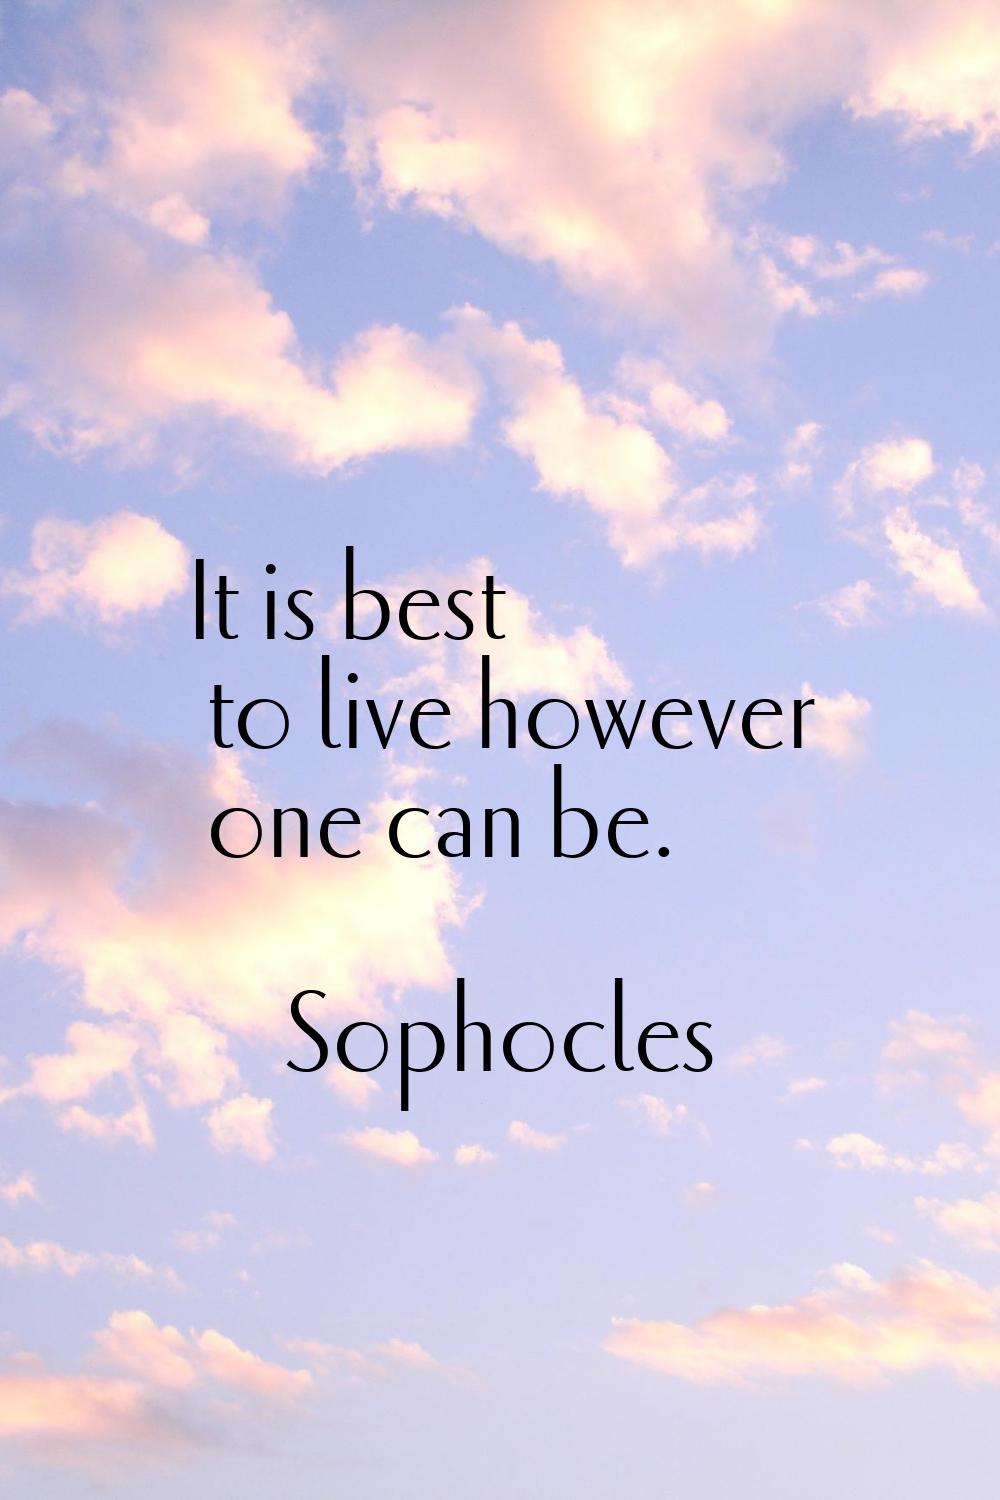 It is best to live however one can be.